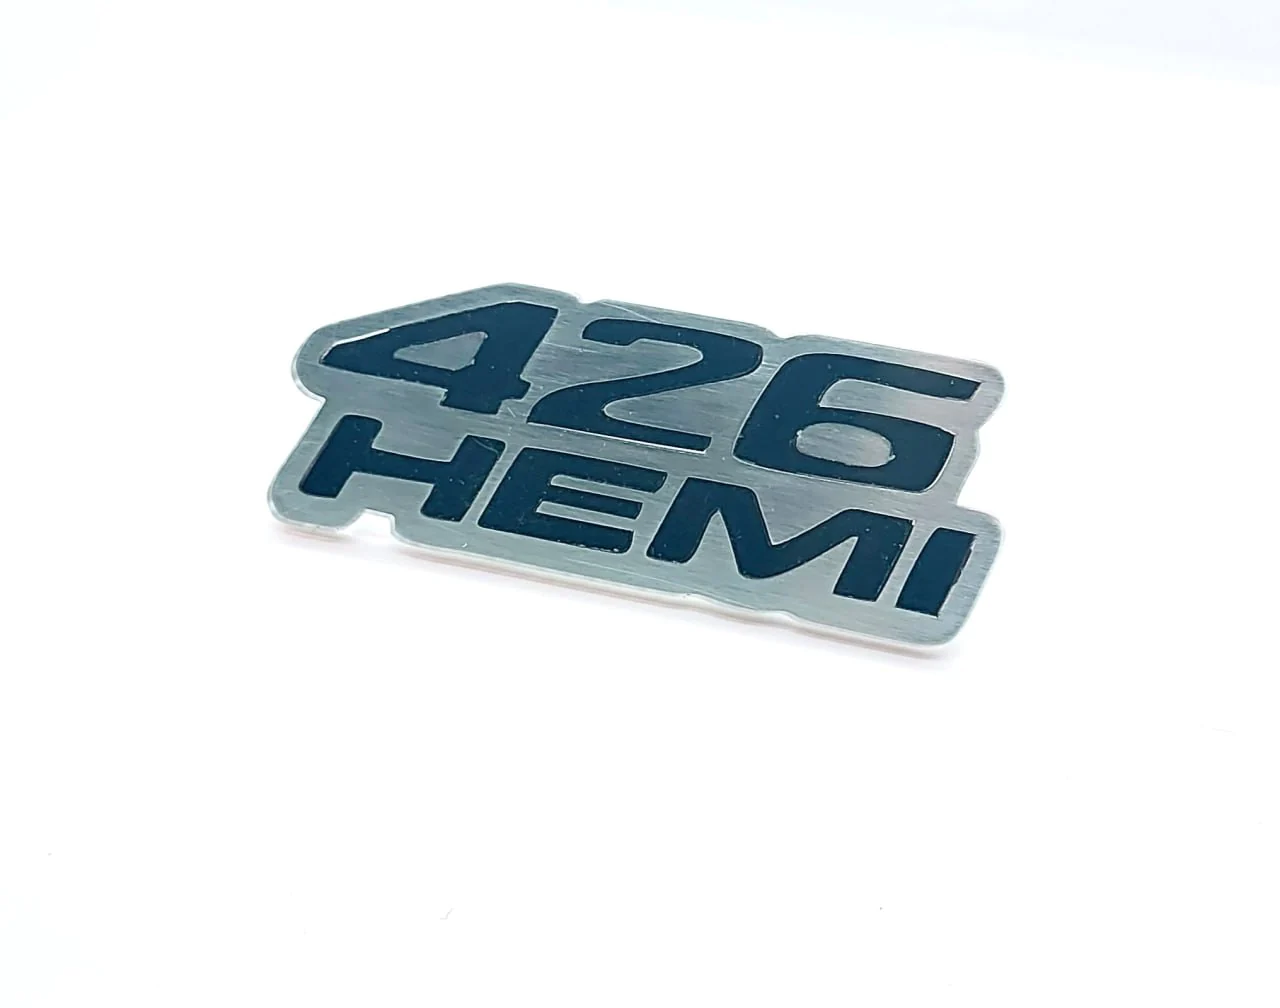 Dodge Challenger Stainless Steel trunk rear emblem between tail lights with 426HEMI logo